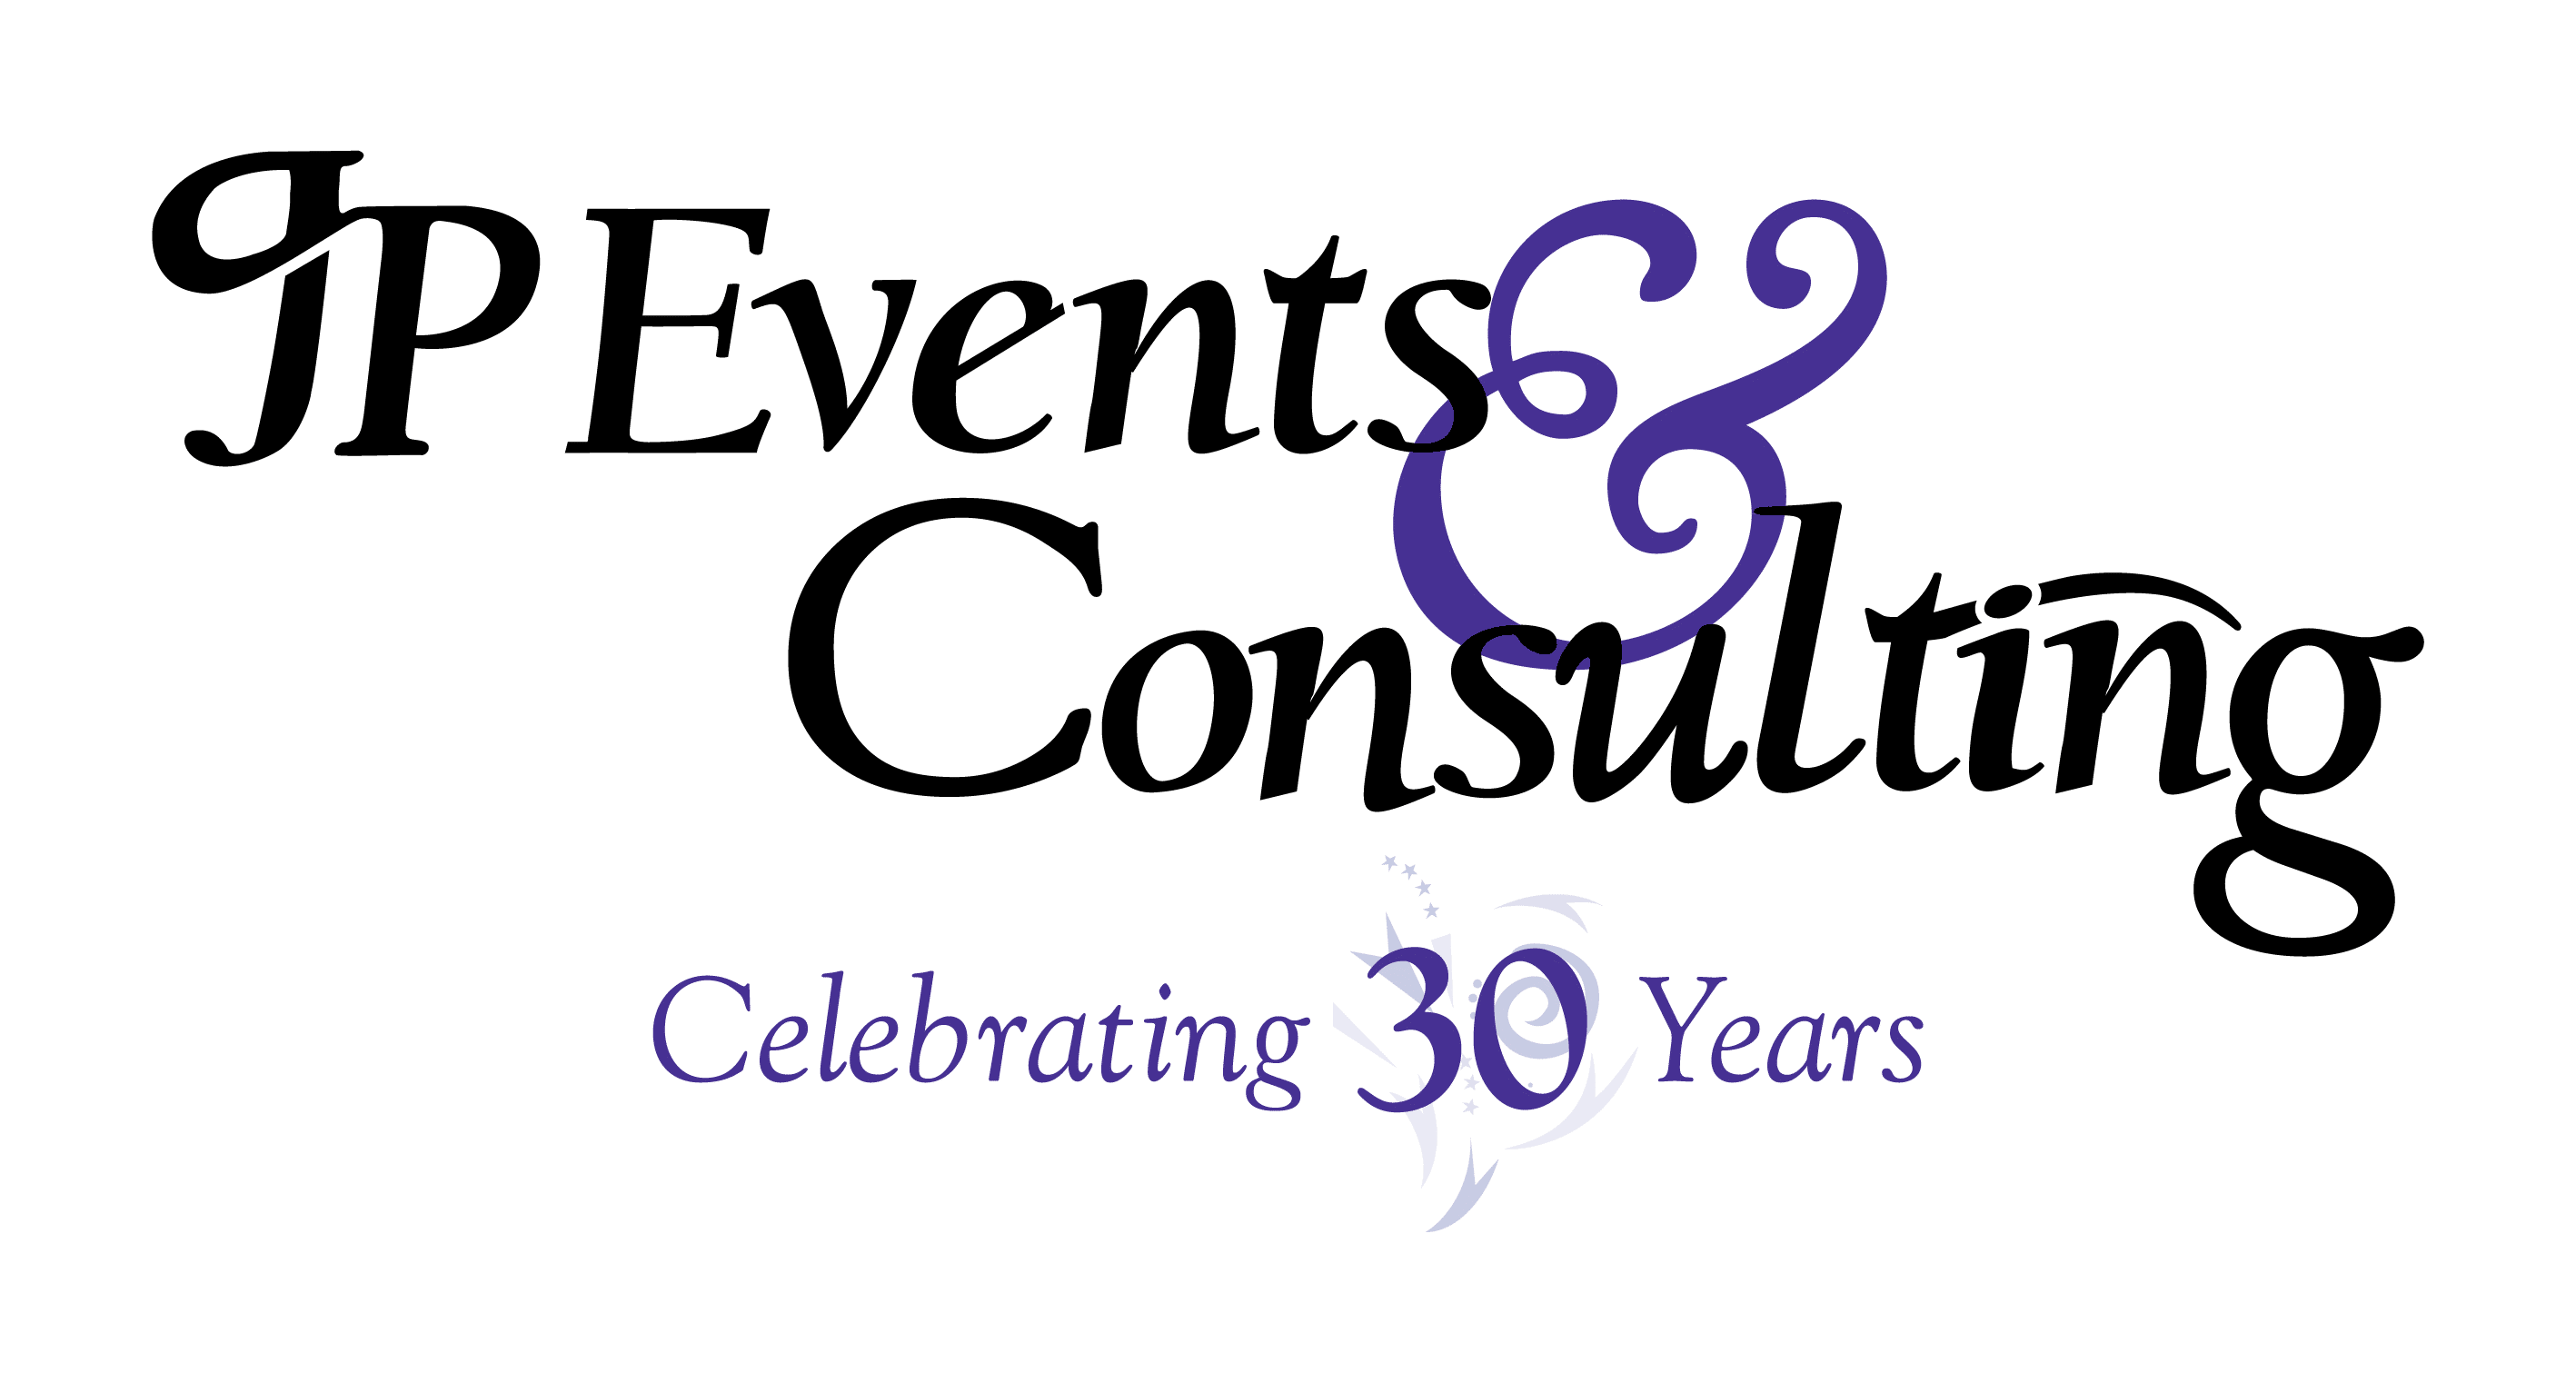 JP Events & Consulting